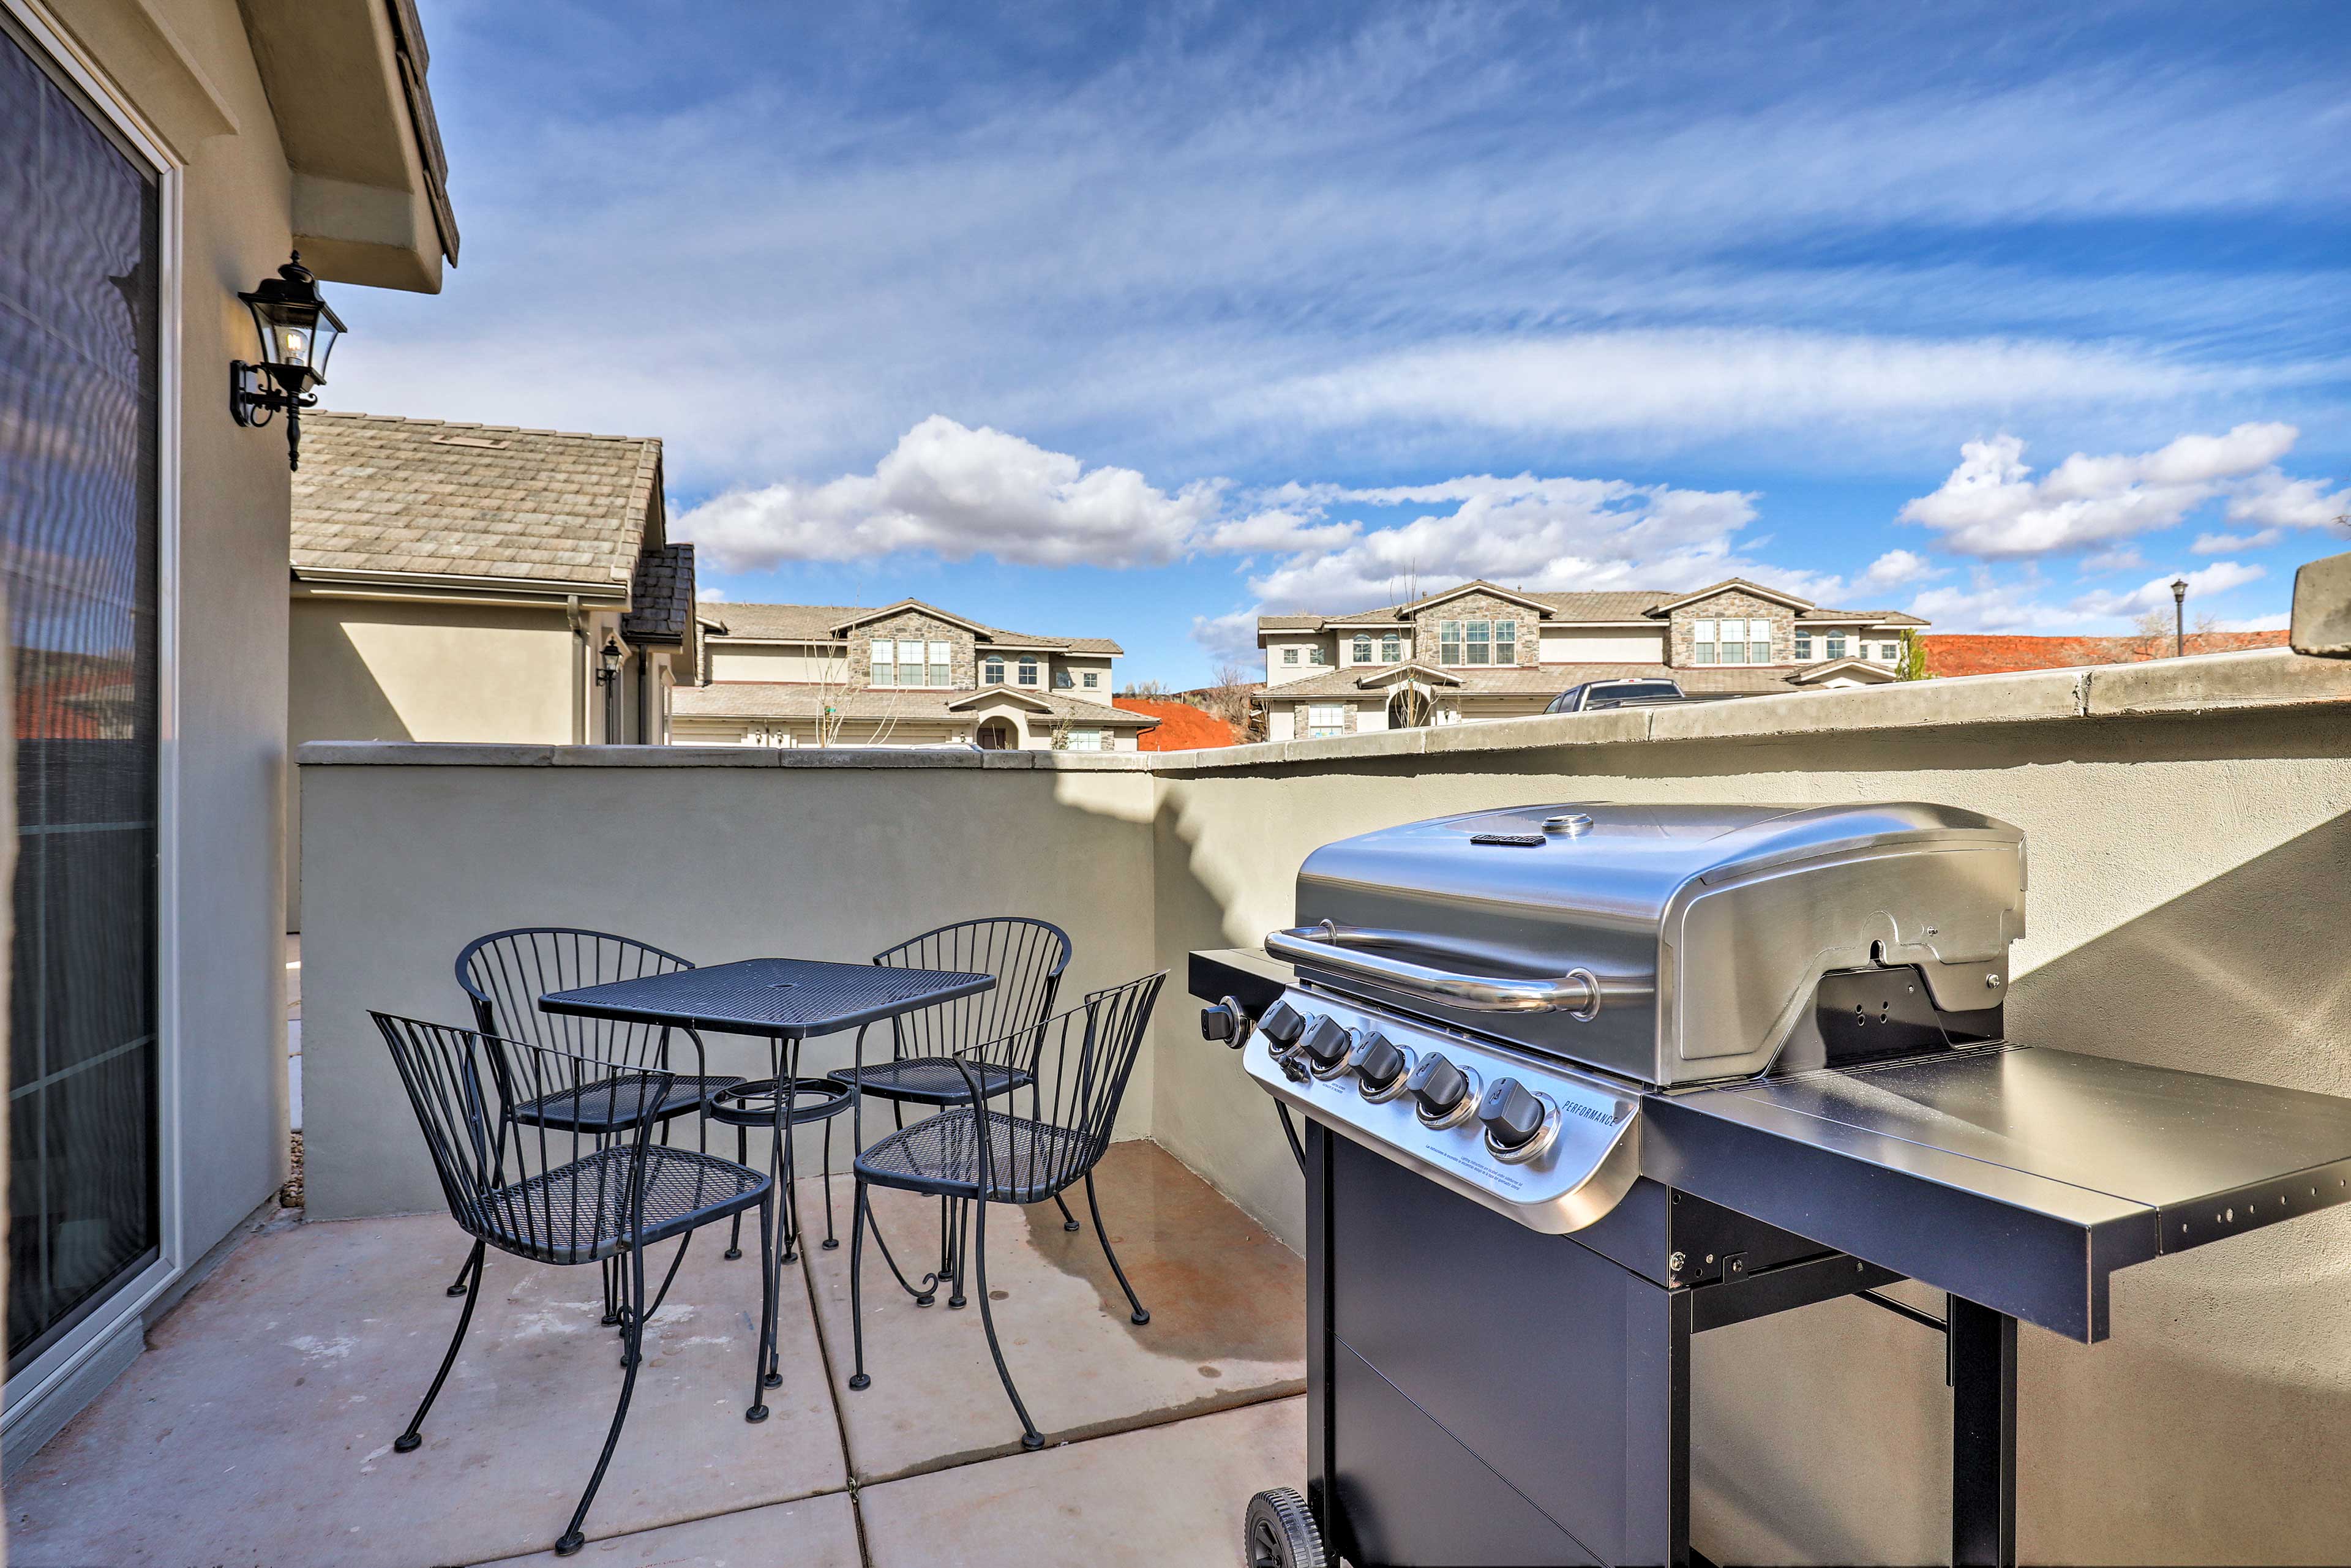 Private Patio | Gas Grill | Outdoor Dining Area